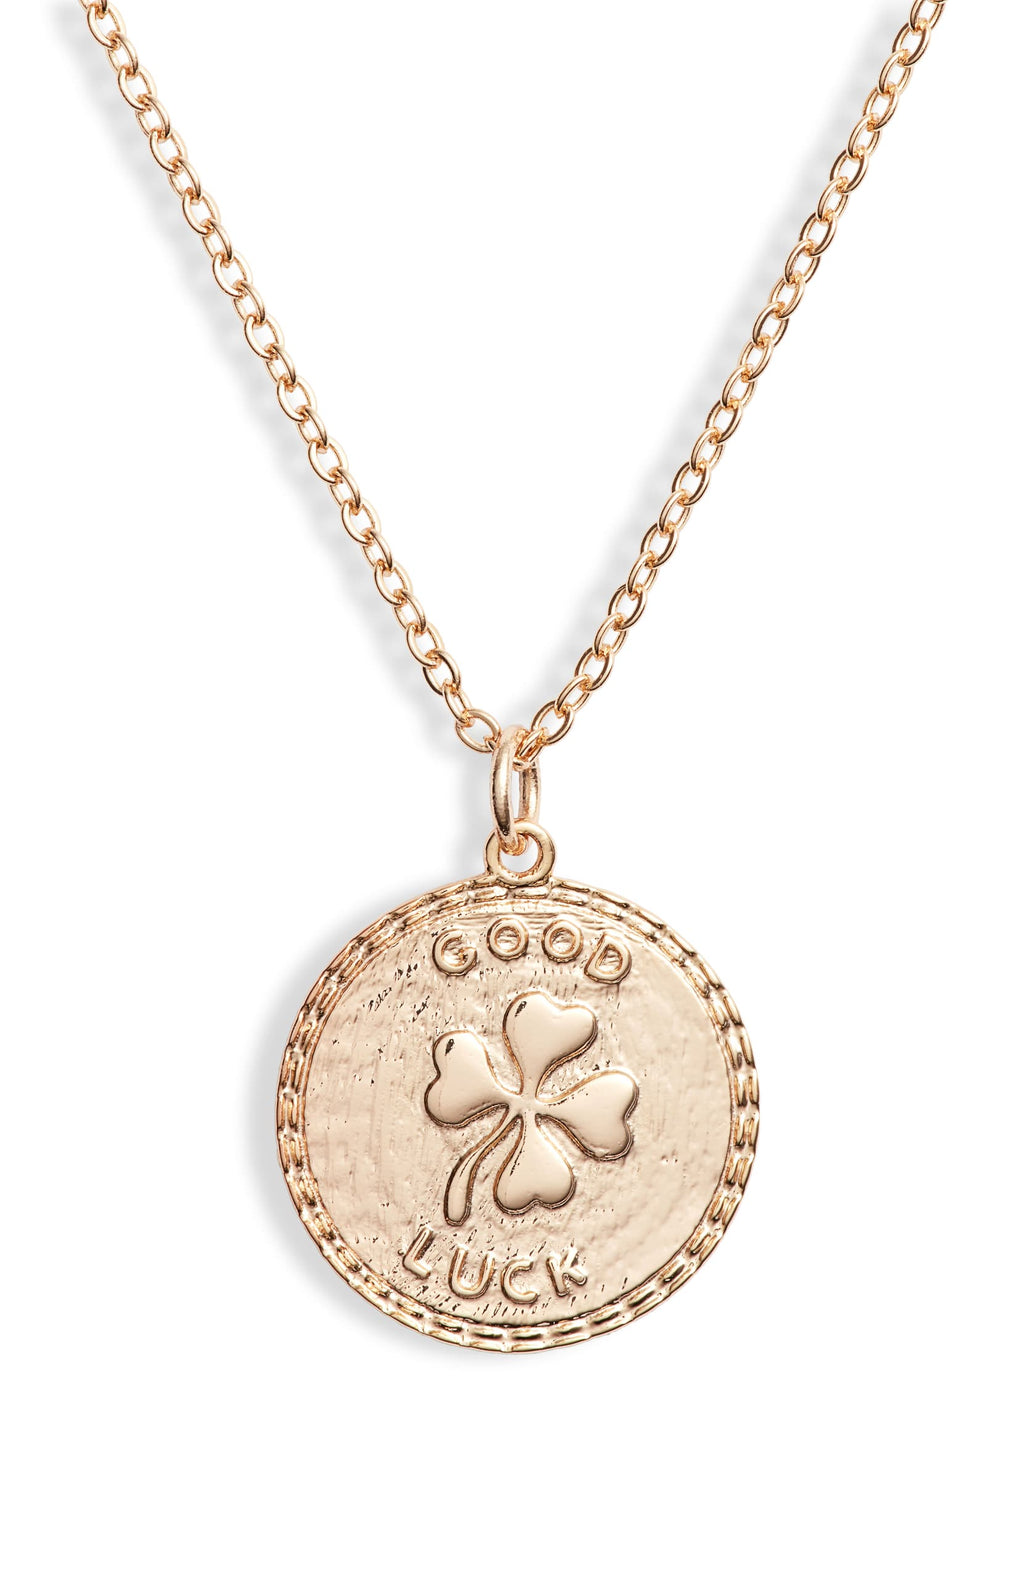 Good Luck Disc Charm Necklace